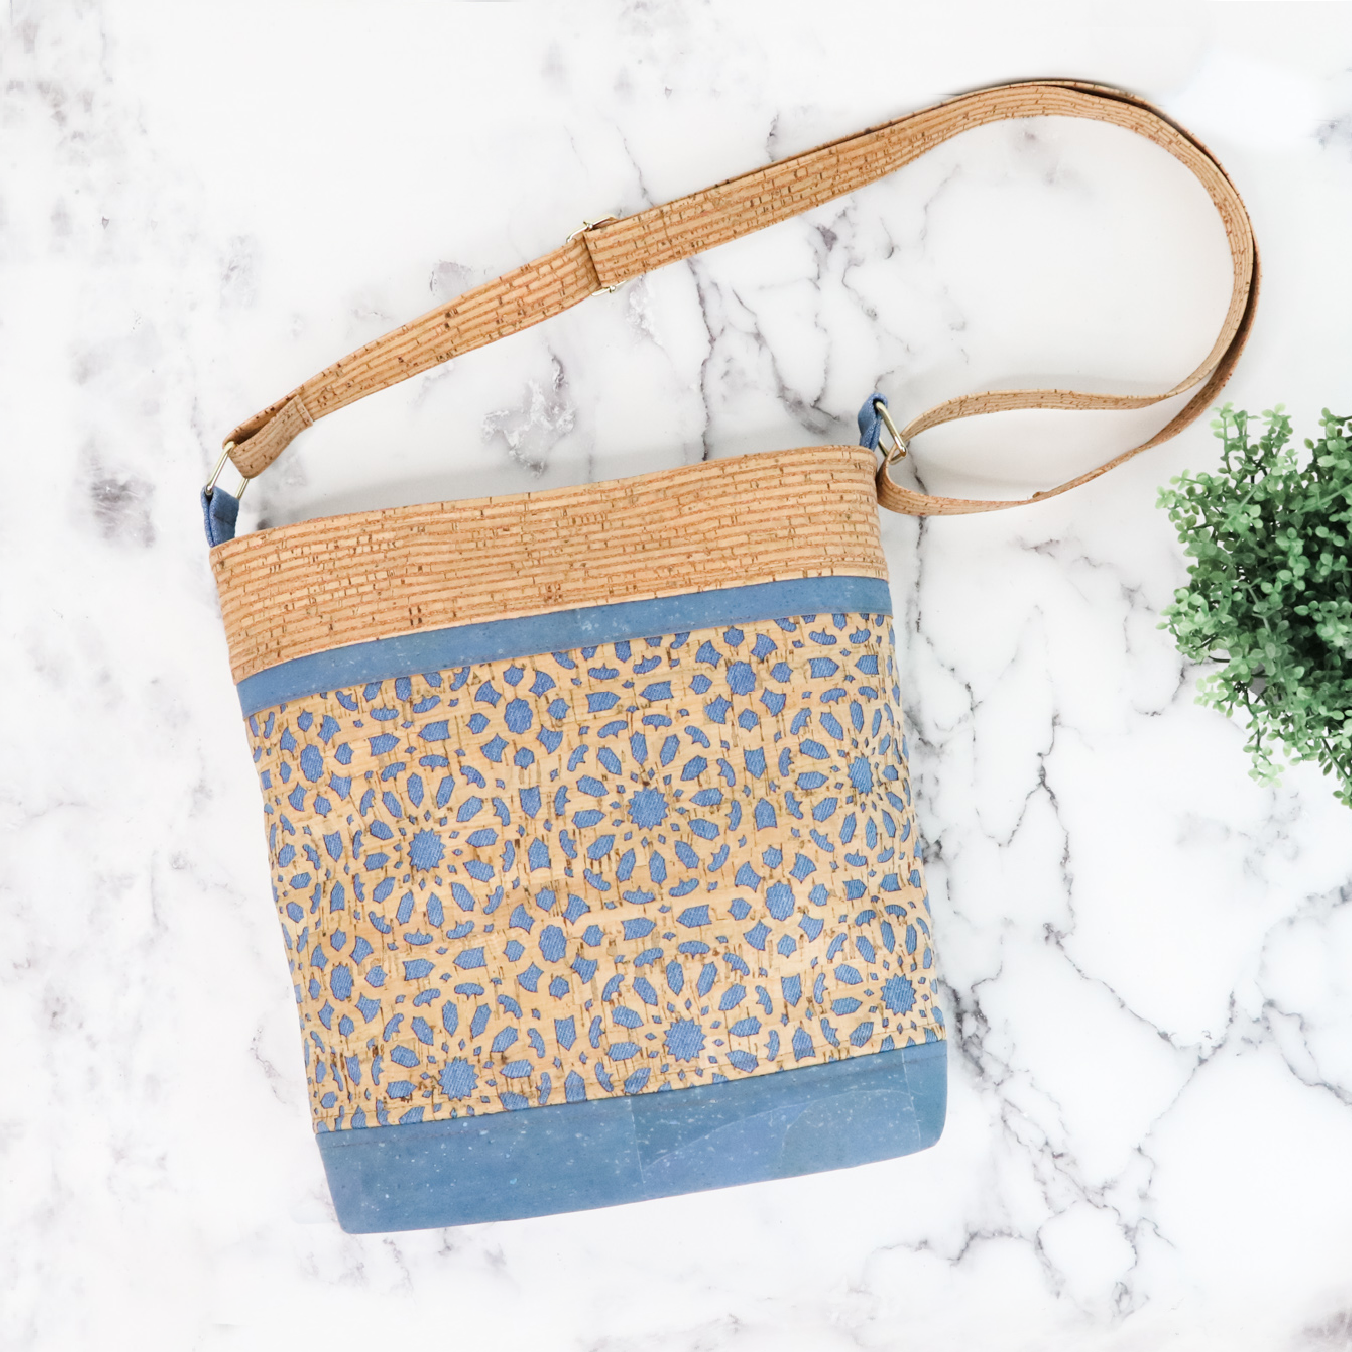 New Pattern Release: The Mackenzie Bag (A Collaboration with NautiPup Designs)